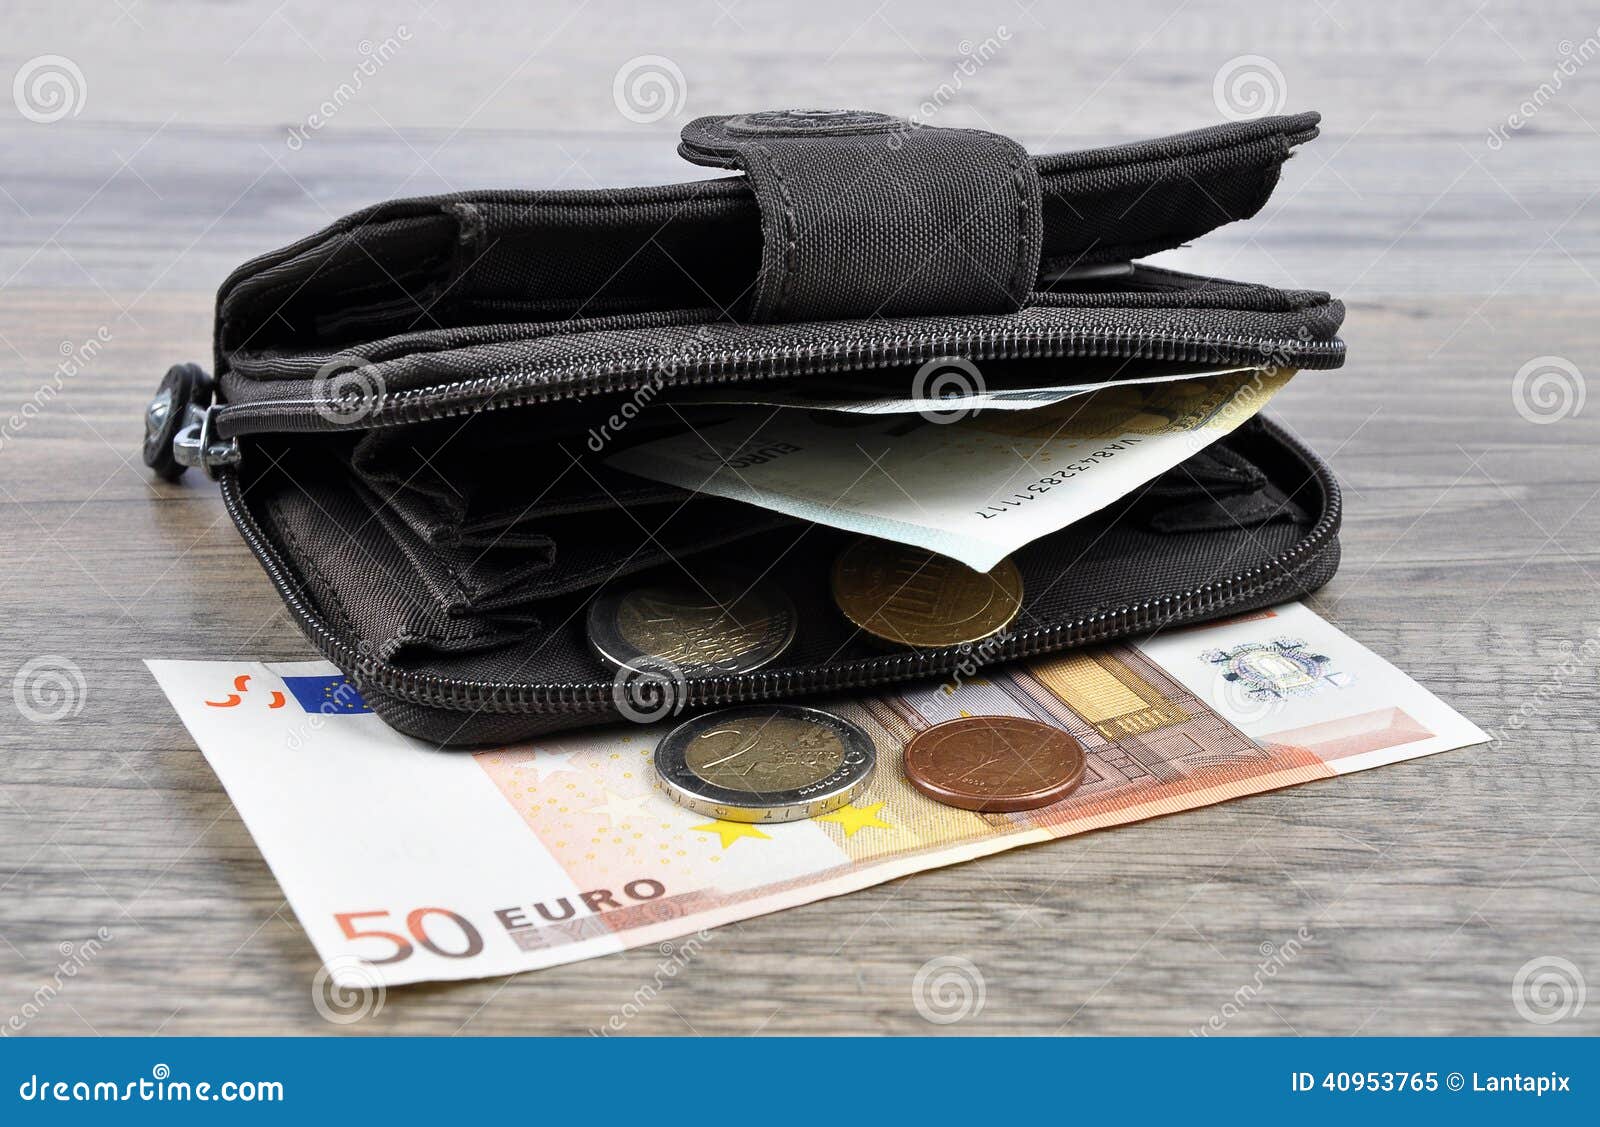 Purse on wood stock image. Image of antique, coin, notes - 40953765